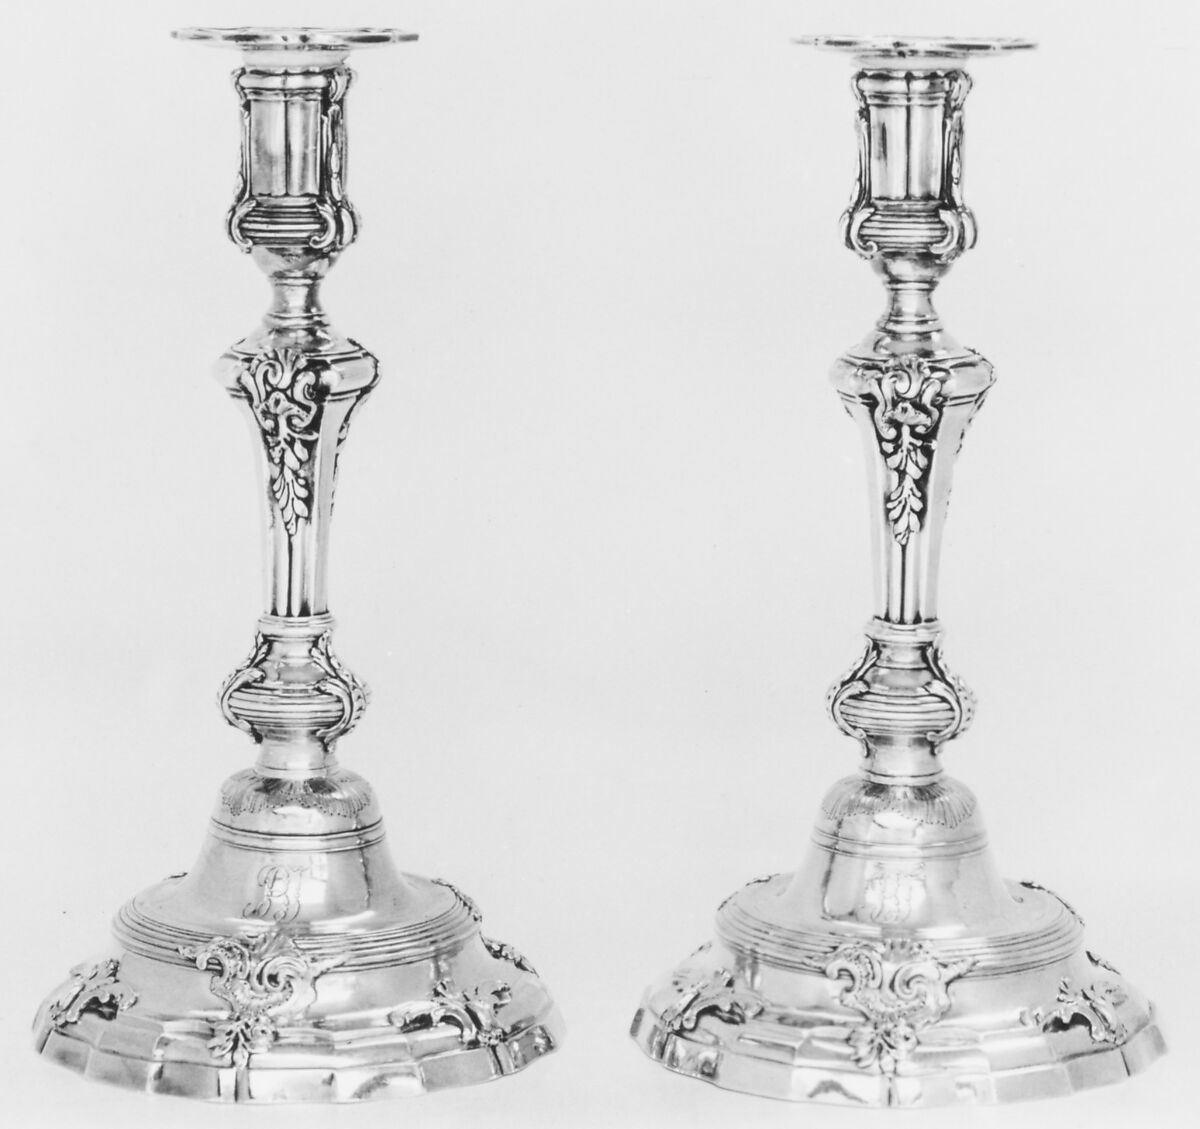 Pair of candlesticks, Michel II Delapierre (master 1737, recorded 1785), Silver, French, Paris 